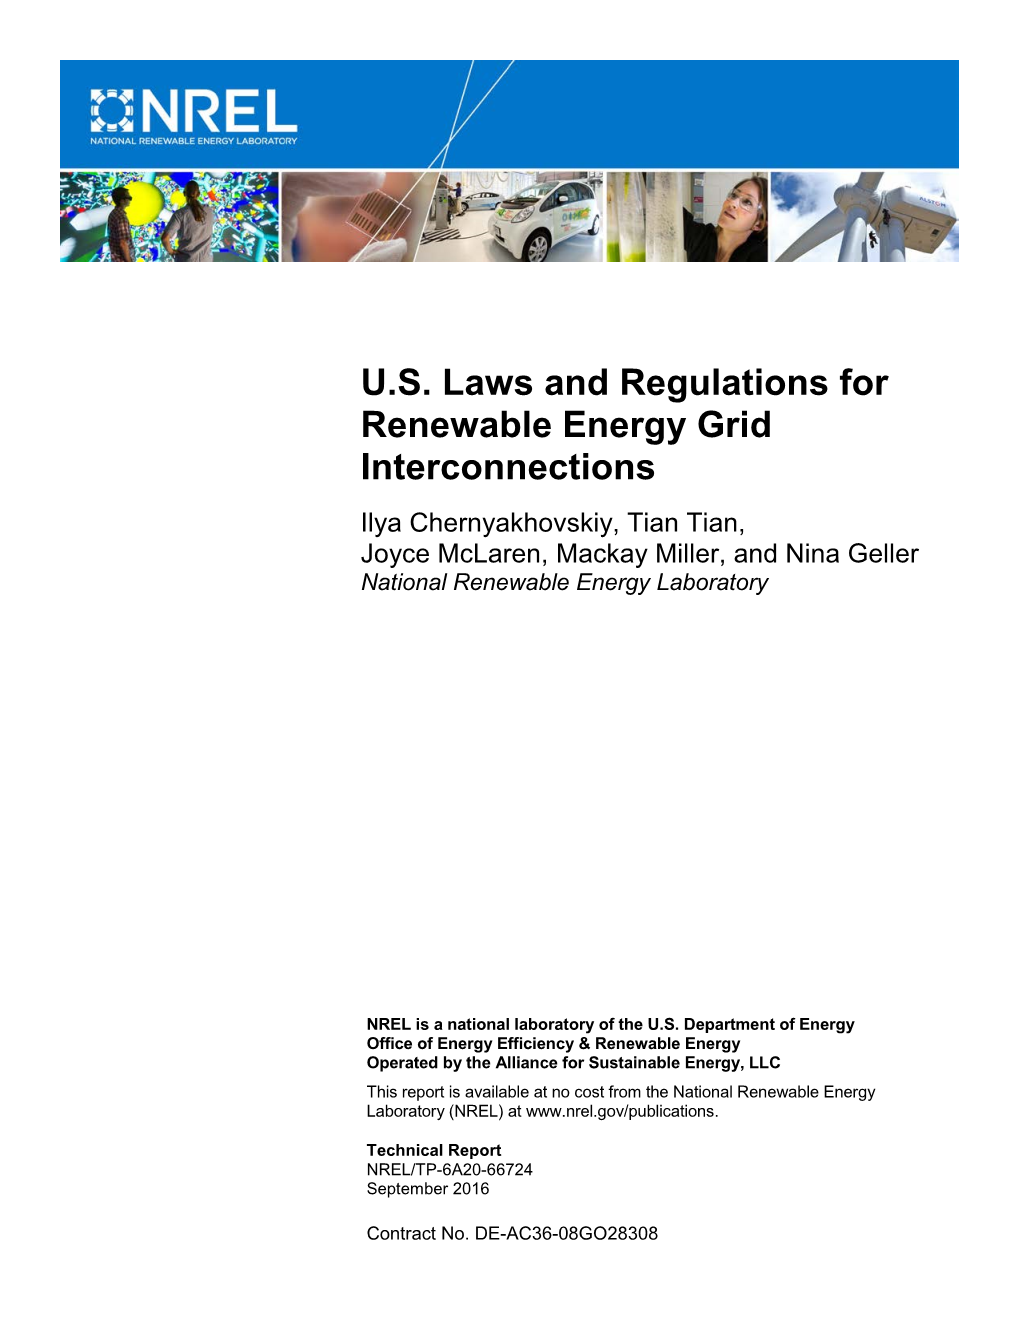 U.S. Laws and Regulations for Renewable Energy Grid Interconnections